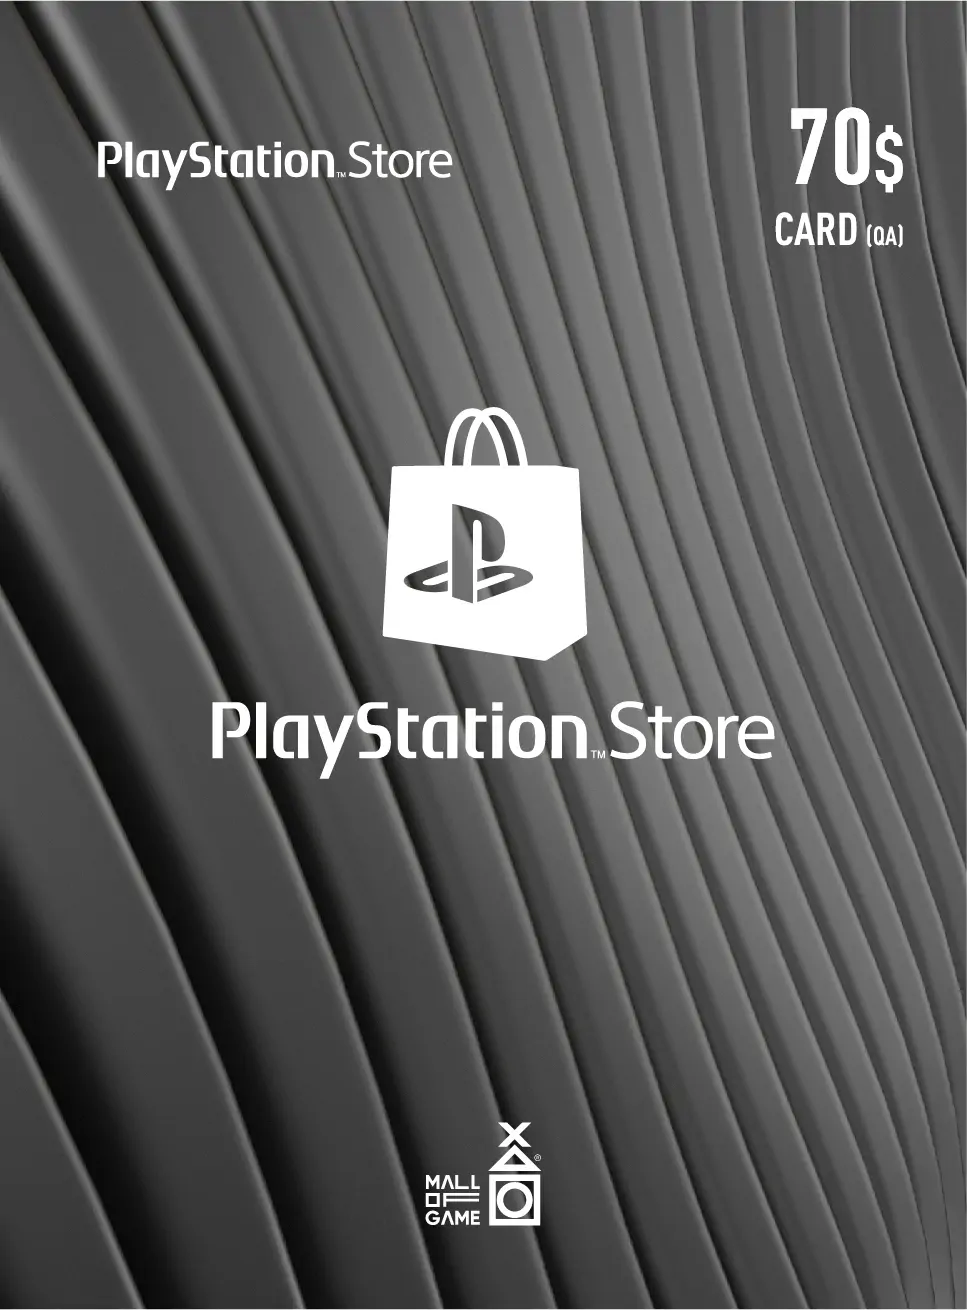 PlayStation™Store USD70 Gift Cards (QA)